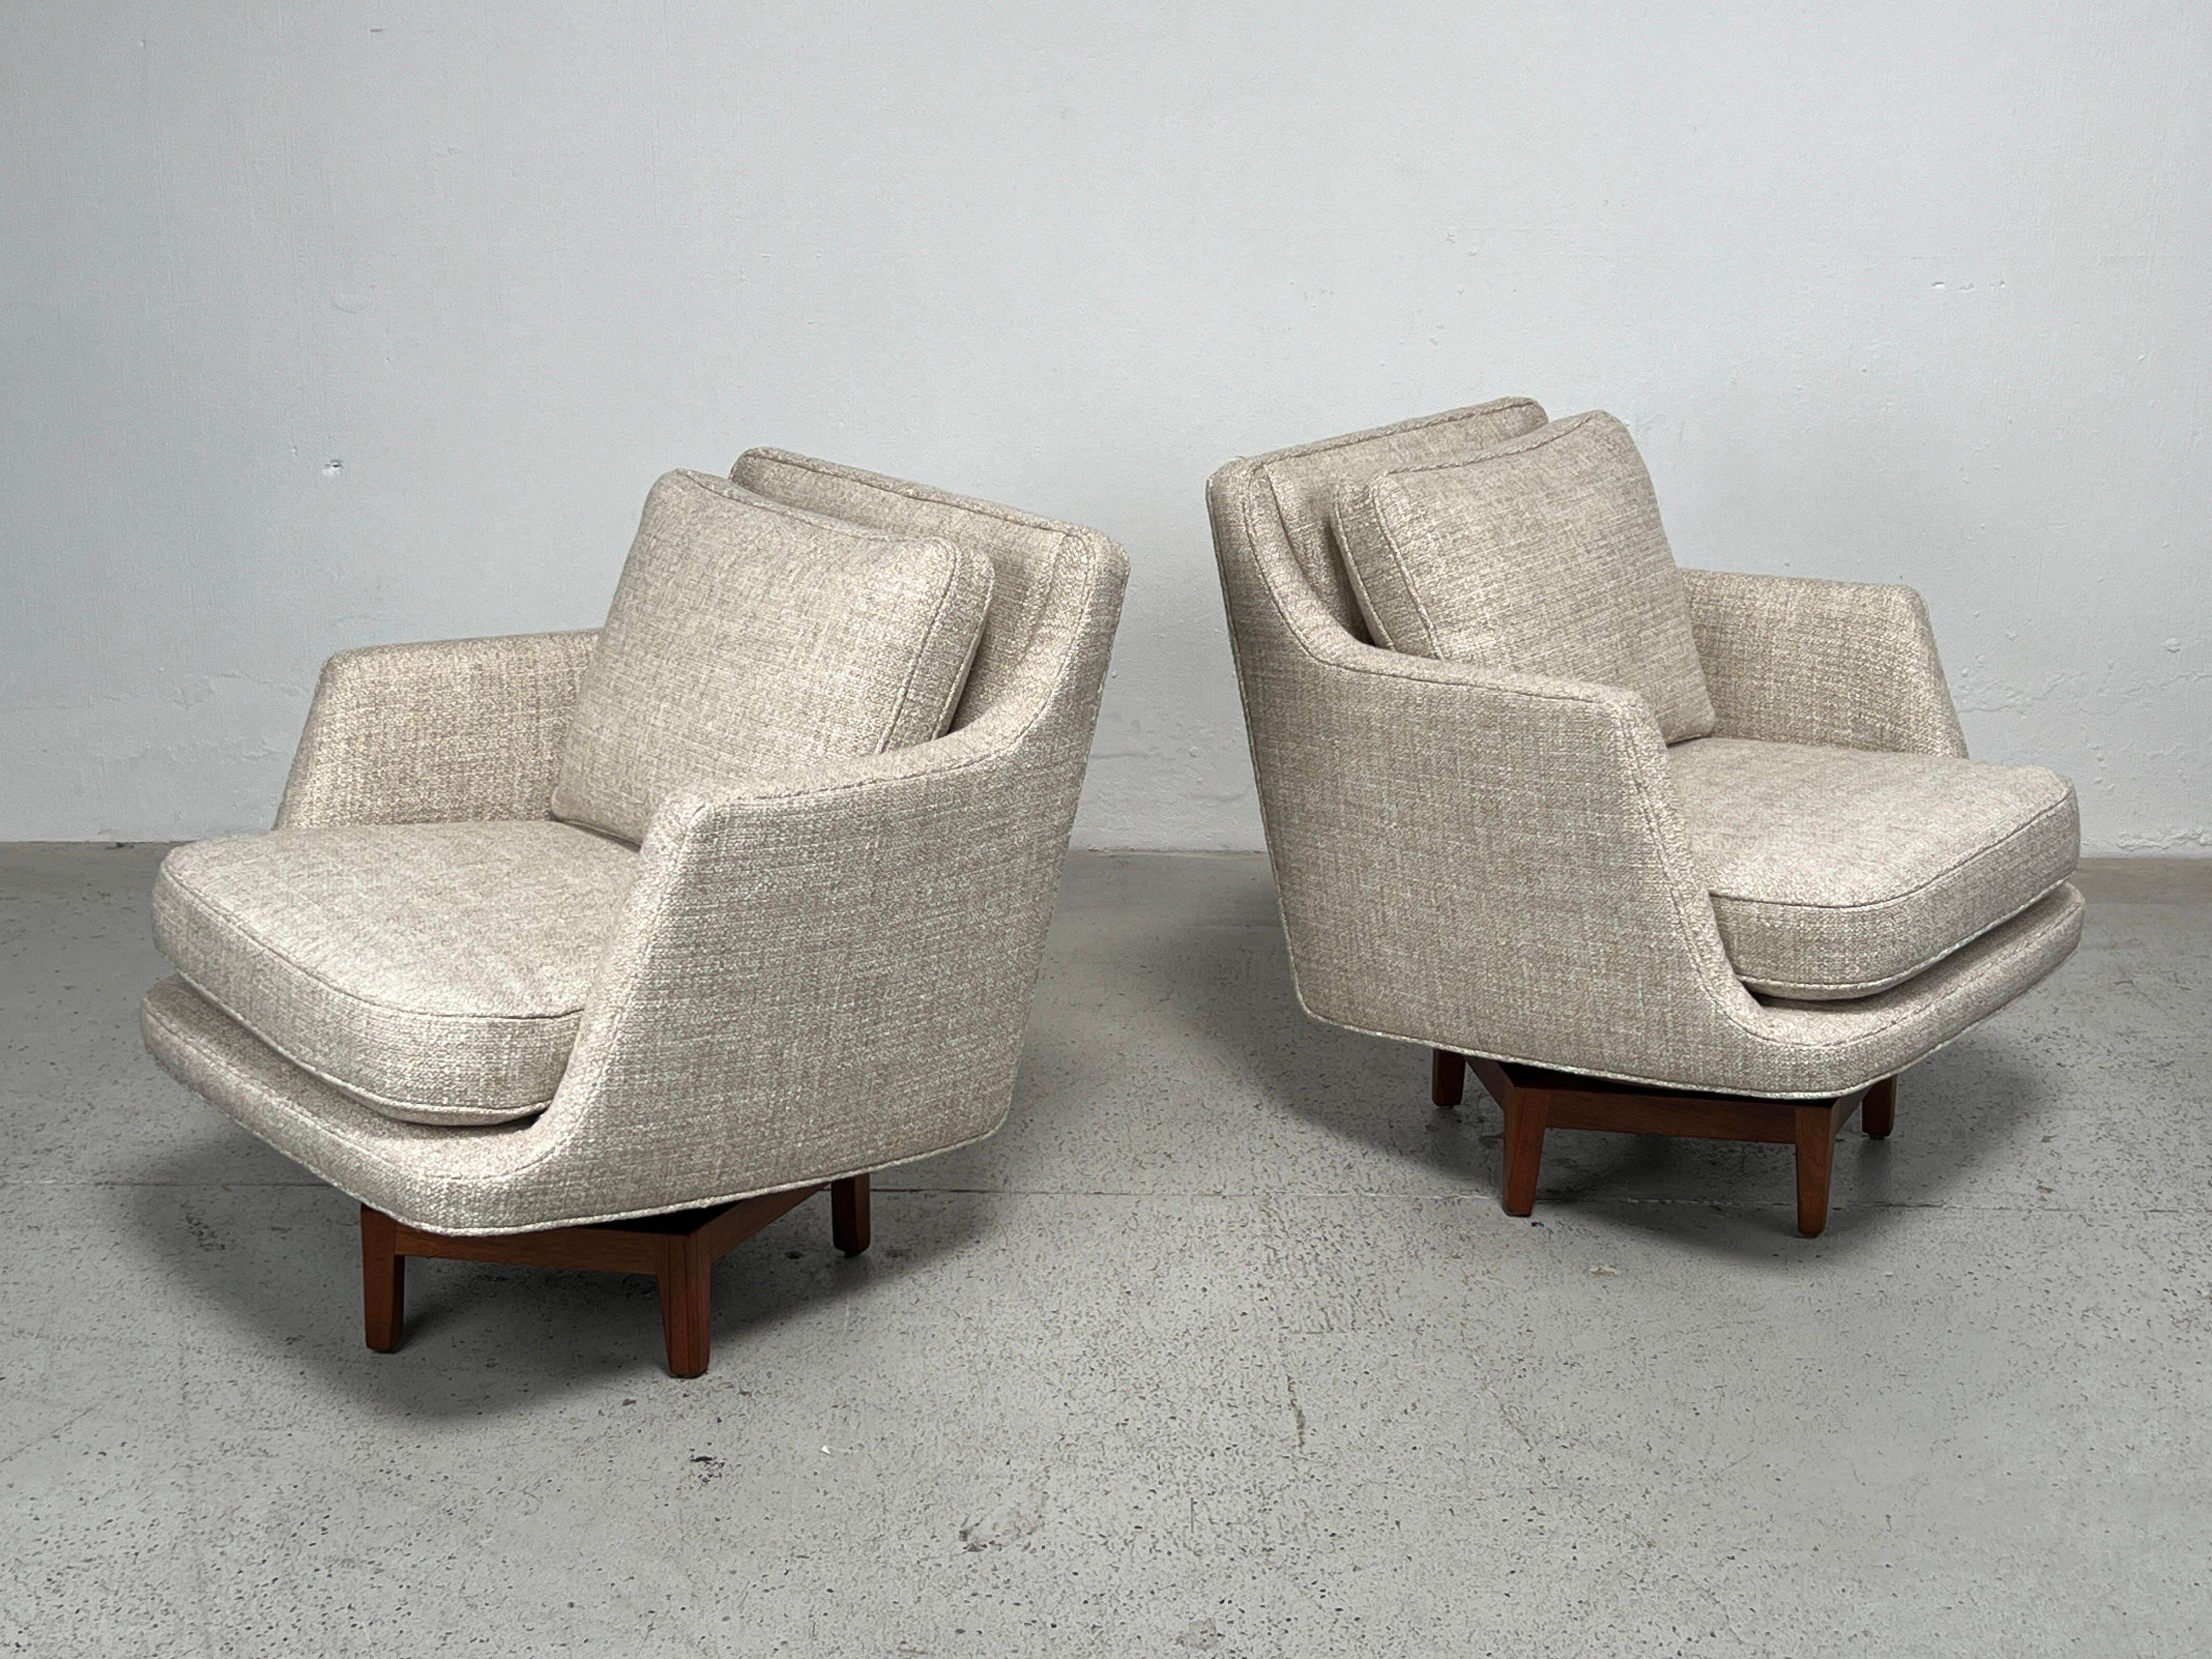 A pair of restored Dunbar swivel chairs by Edward Wormley. Refinished walnut bases and reupholstered in Holly Hunt / Esposito / Natural State fabric. 